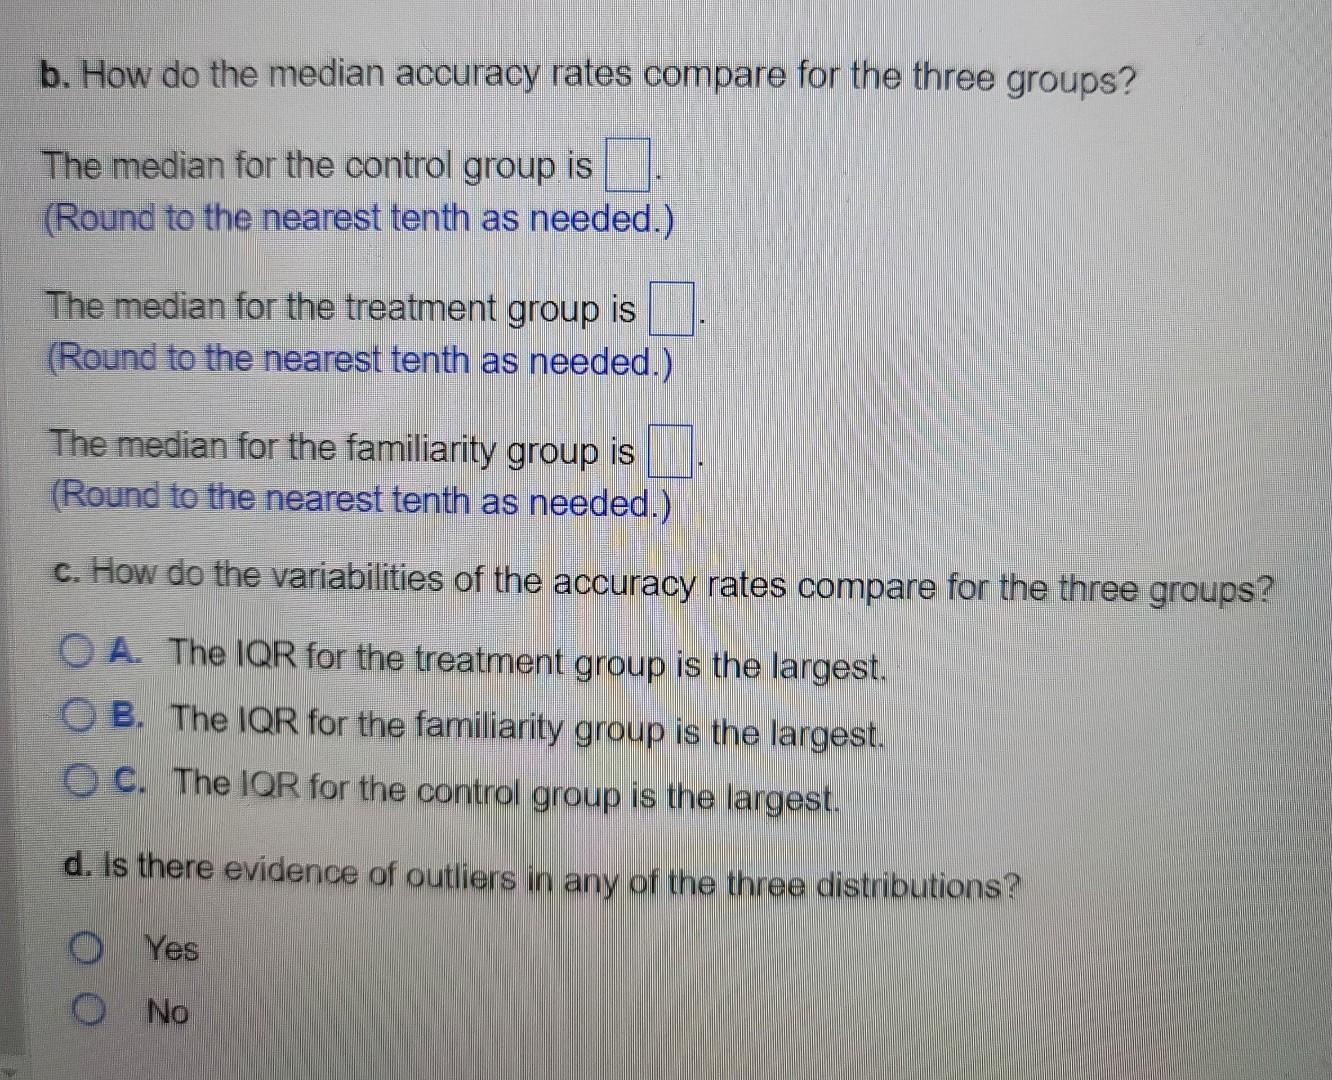 b. How do the median accuracy rates compare for the three groups?
The median for the control group is (Round to the nearest t